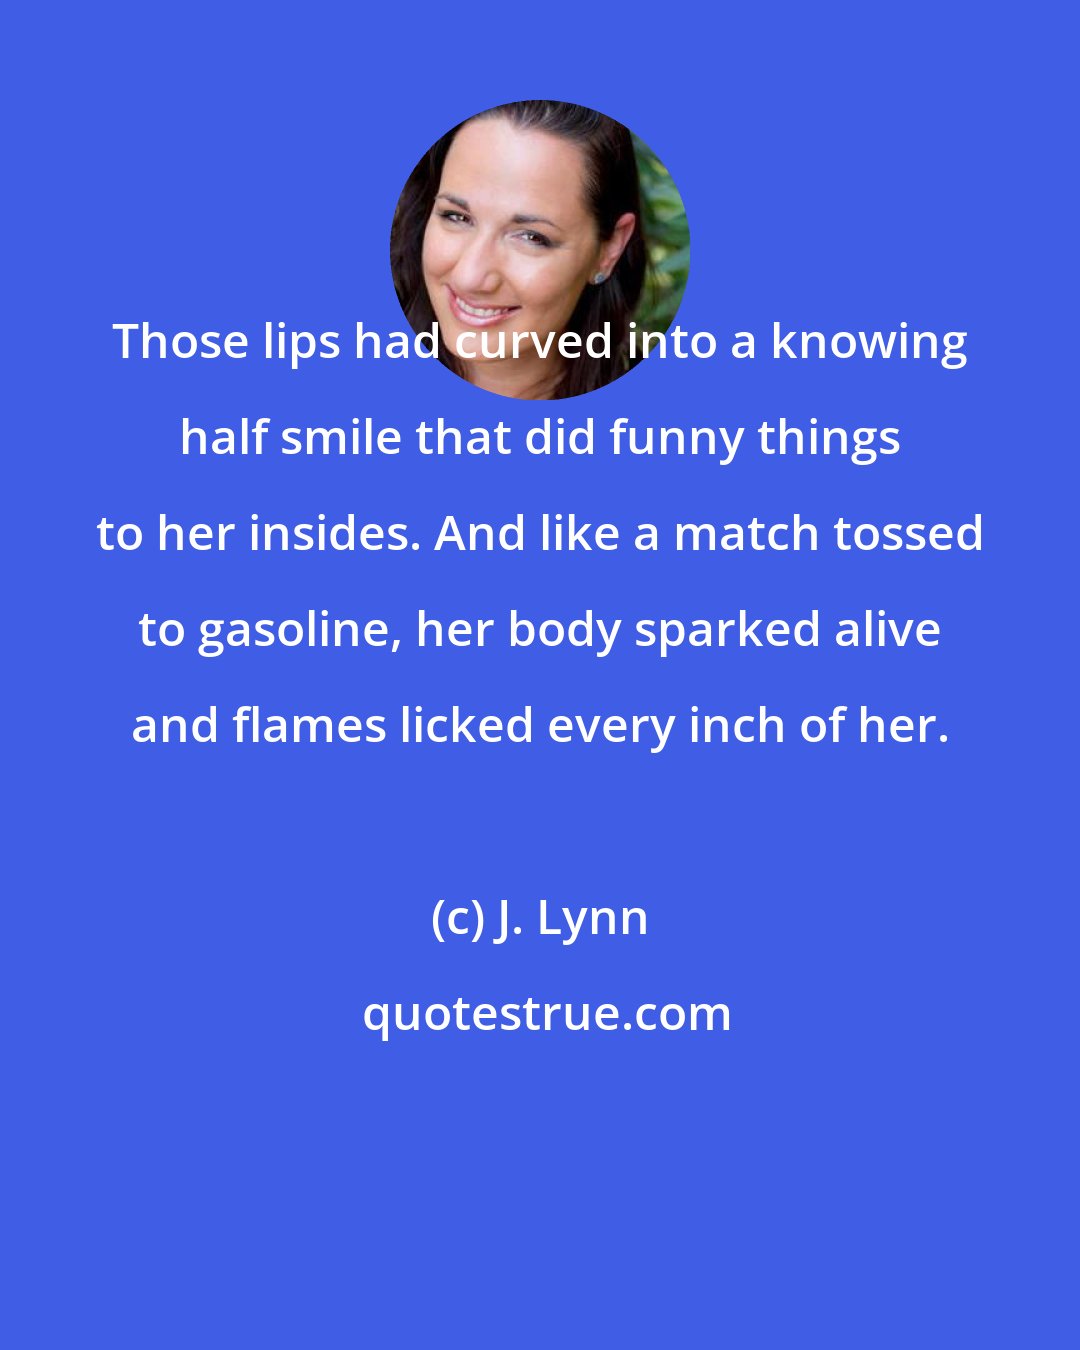 J. Lynn: Those lips had curved into a knowing half smile that did funny things to her insides. And like a match tossed to gasoline, her body sparked alive and flames licked every inch of her.